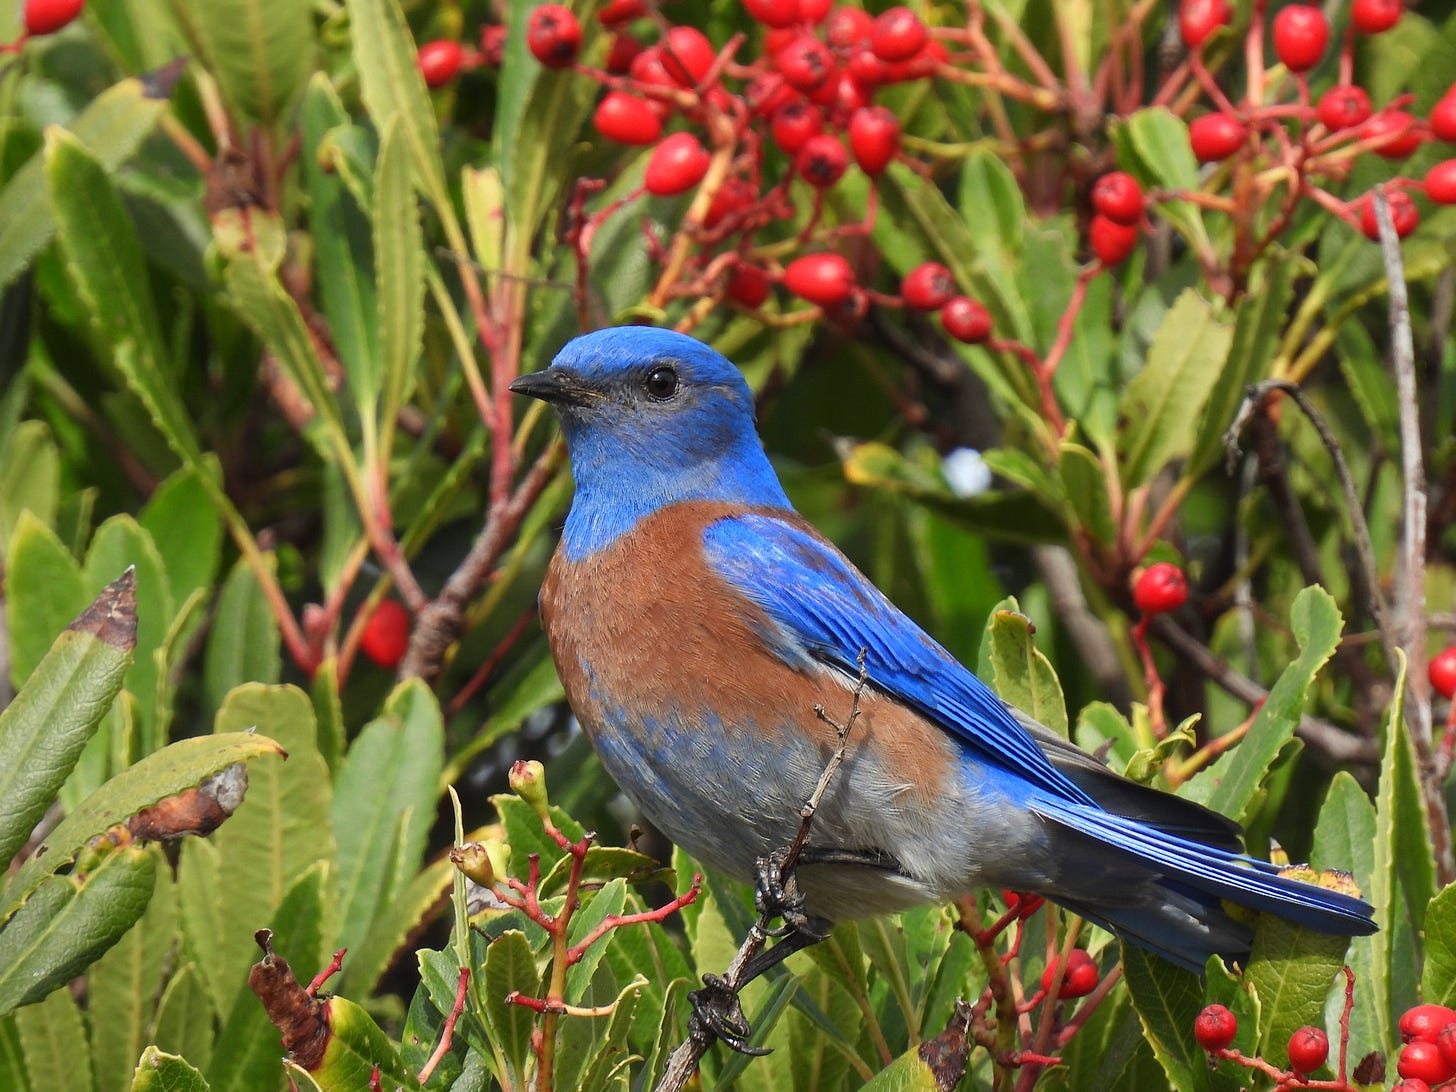 A gorgeous bird with a blue head and wings, black beak and eyes, and a gray underbelly, in front of a stunning background of red berries. It looks like it's wearing a rust-colored safety vest.